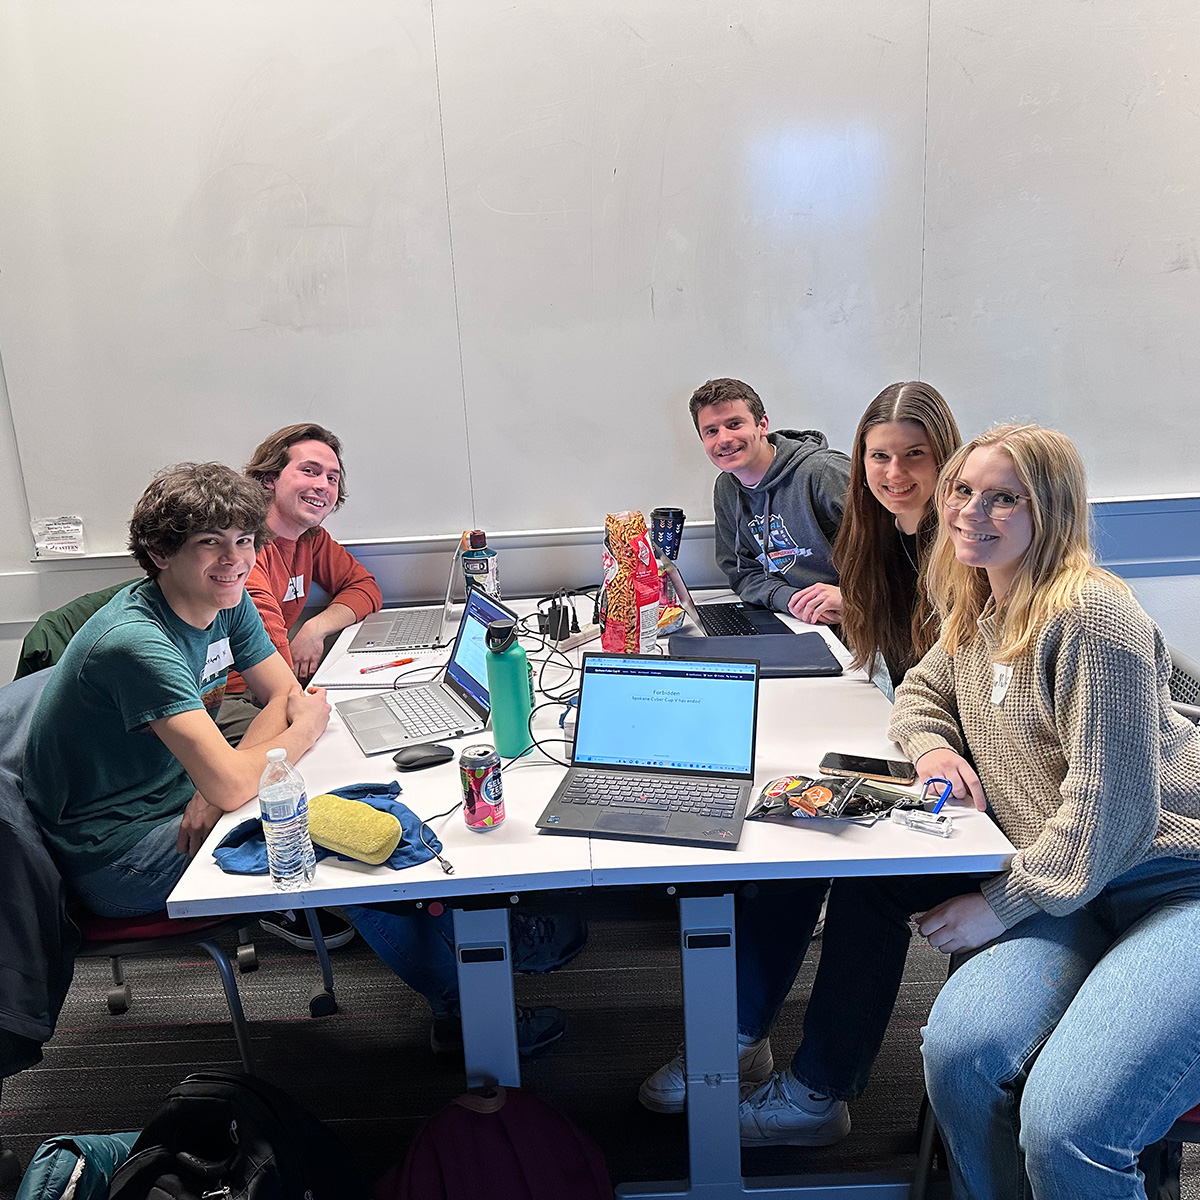 Megan Nulf and 4 other Uidaho engineering students s at a study table.